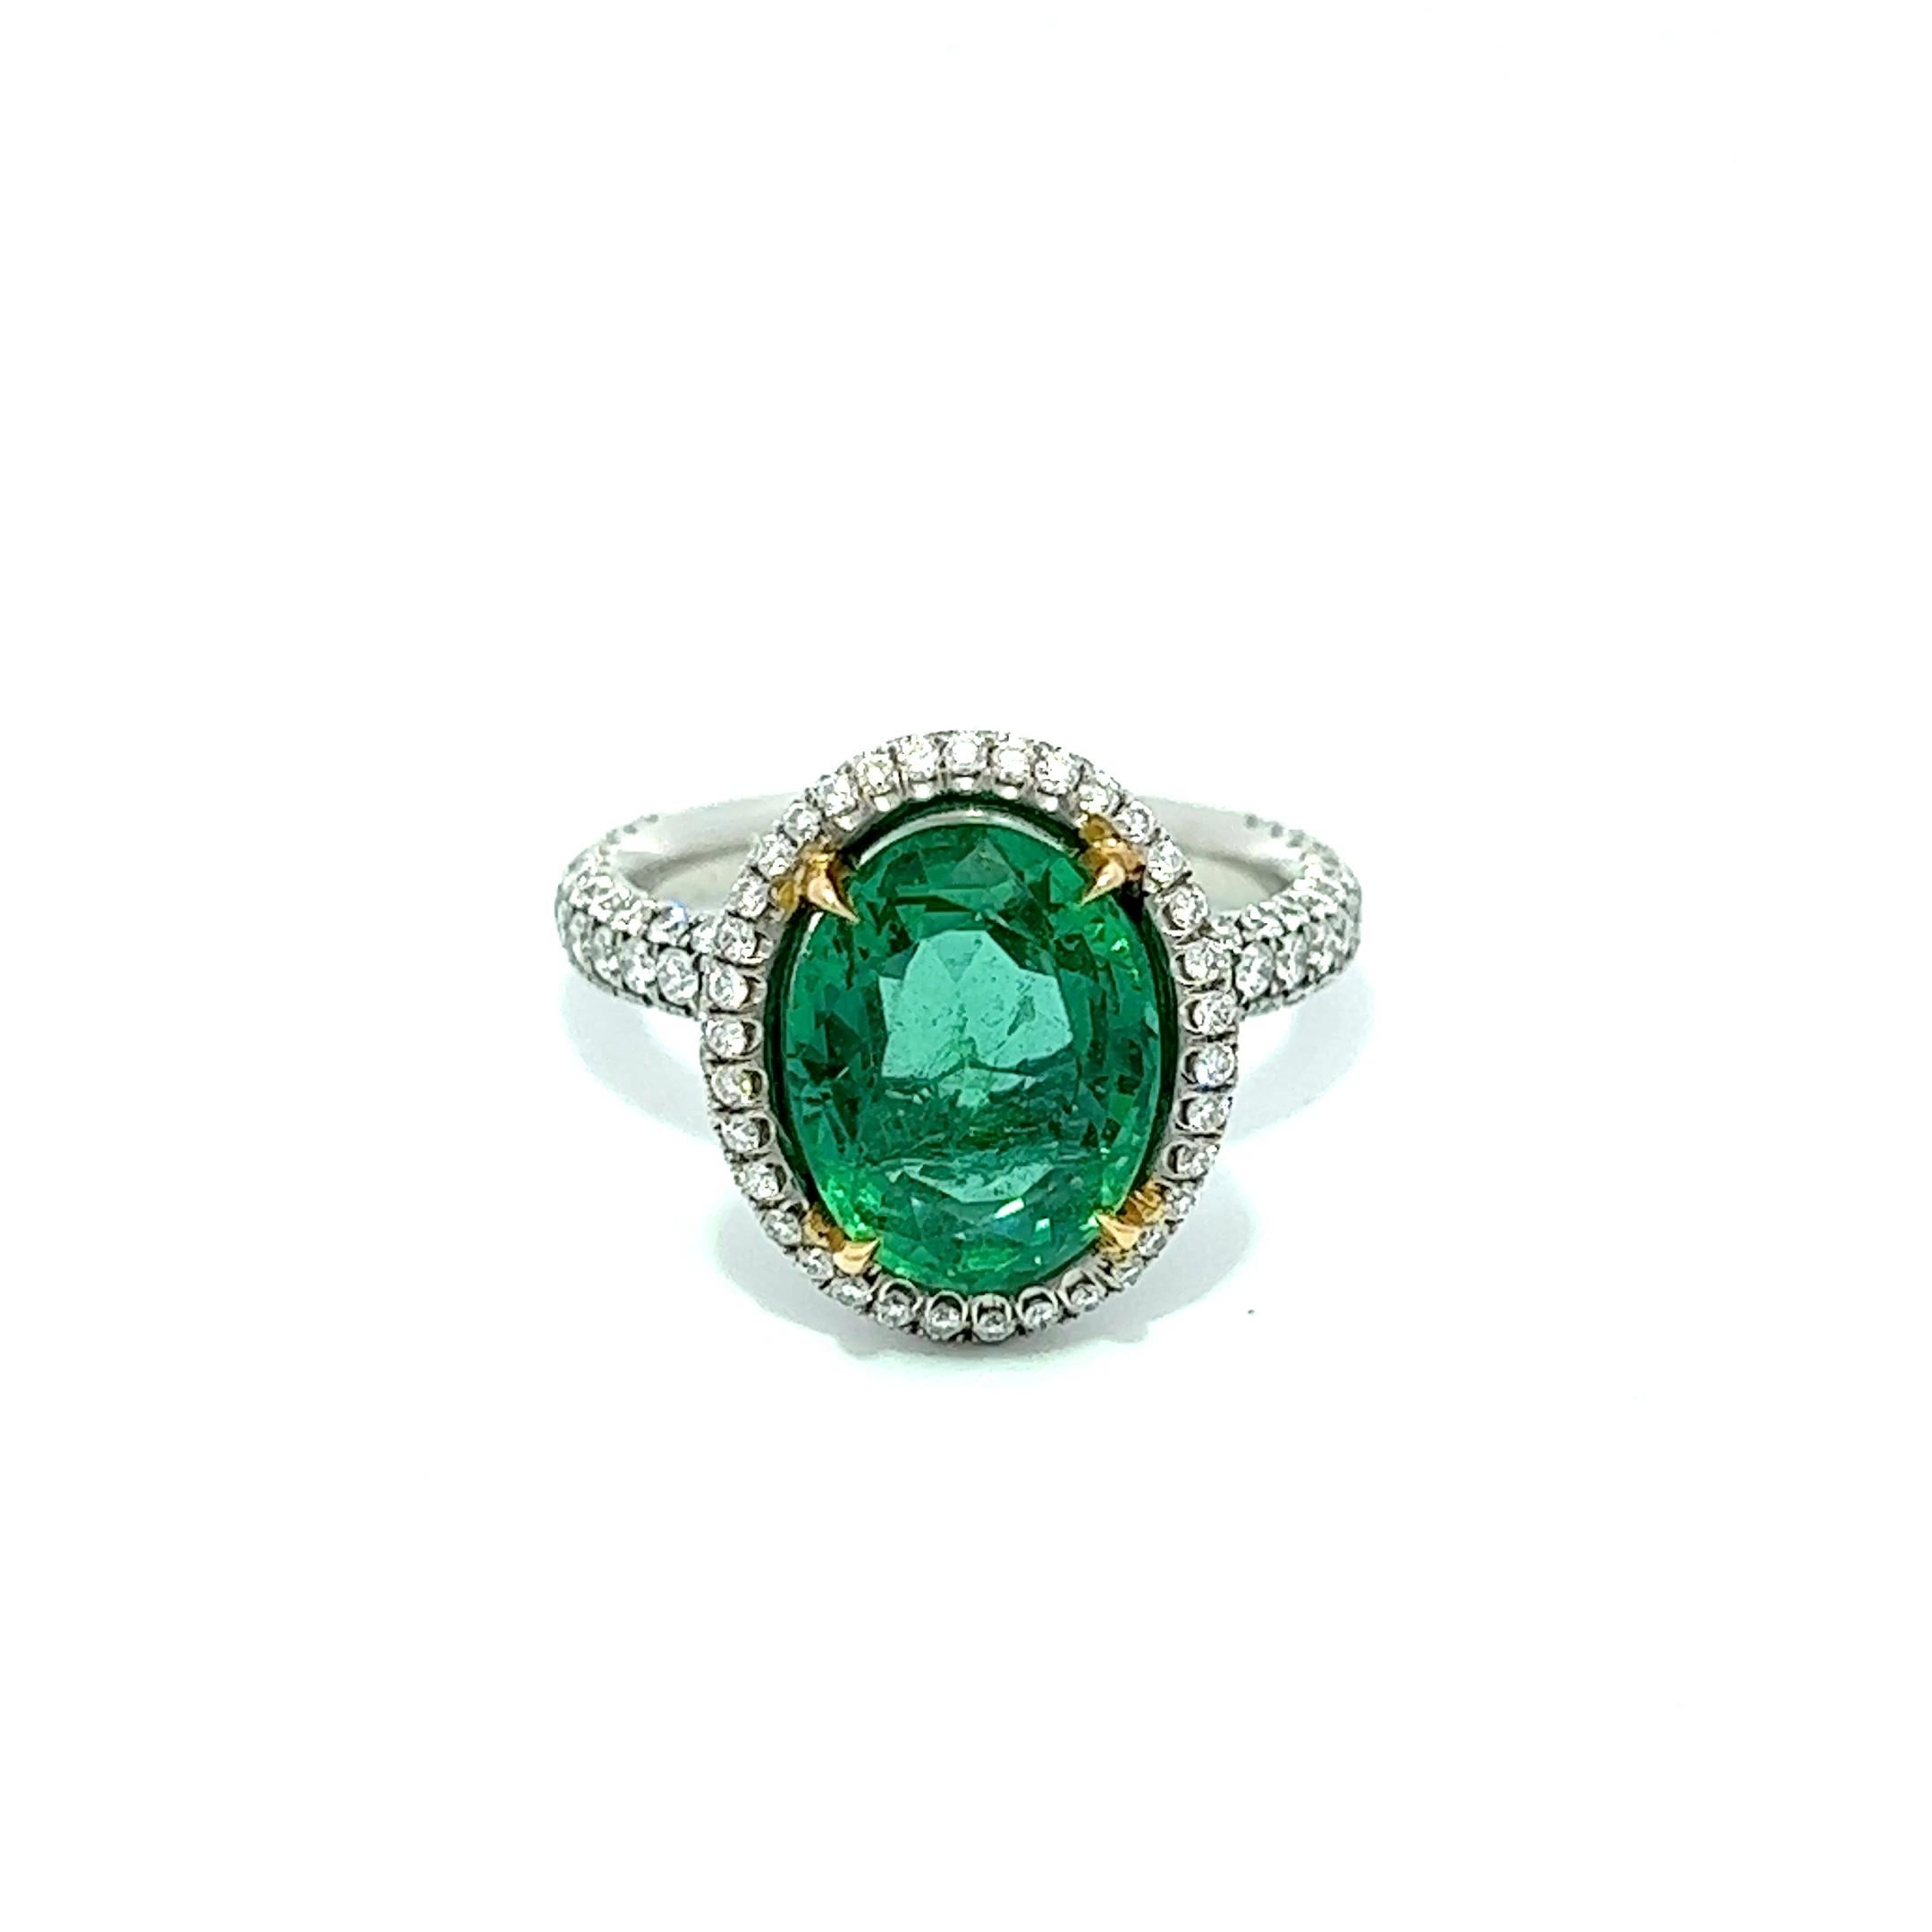 This exquisite ring boasts a 4.91-carat oval-shaped Colombian emerald, elegantly encircled by round diamonds that gradually taper down halfway on both sides. The emerald is set in platinum, ensuring maximum security and stability. You can rest